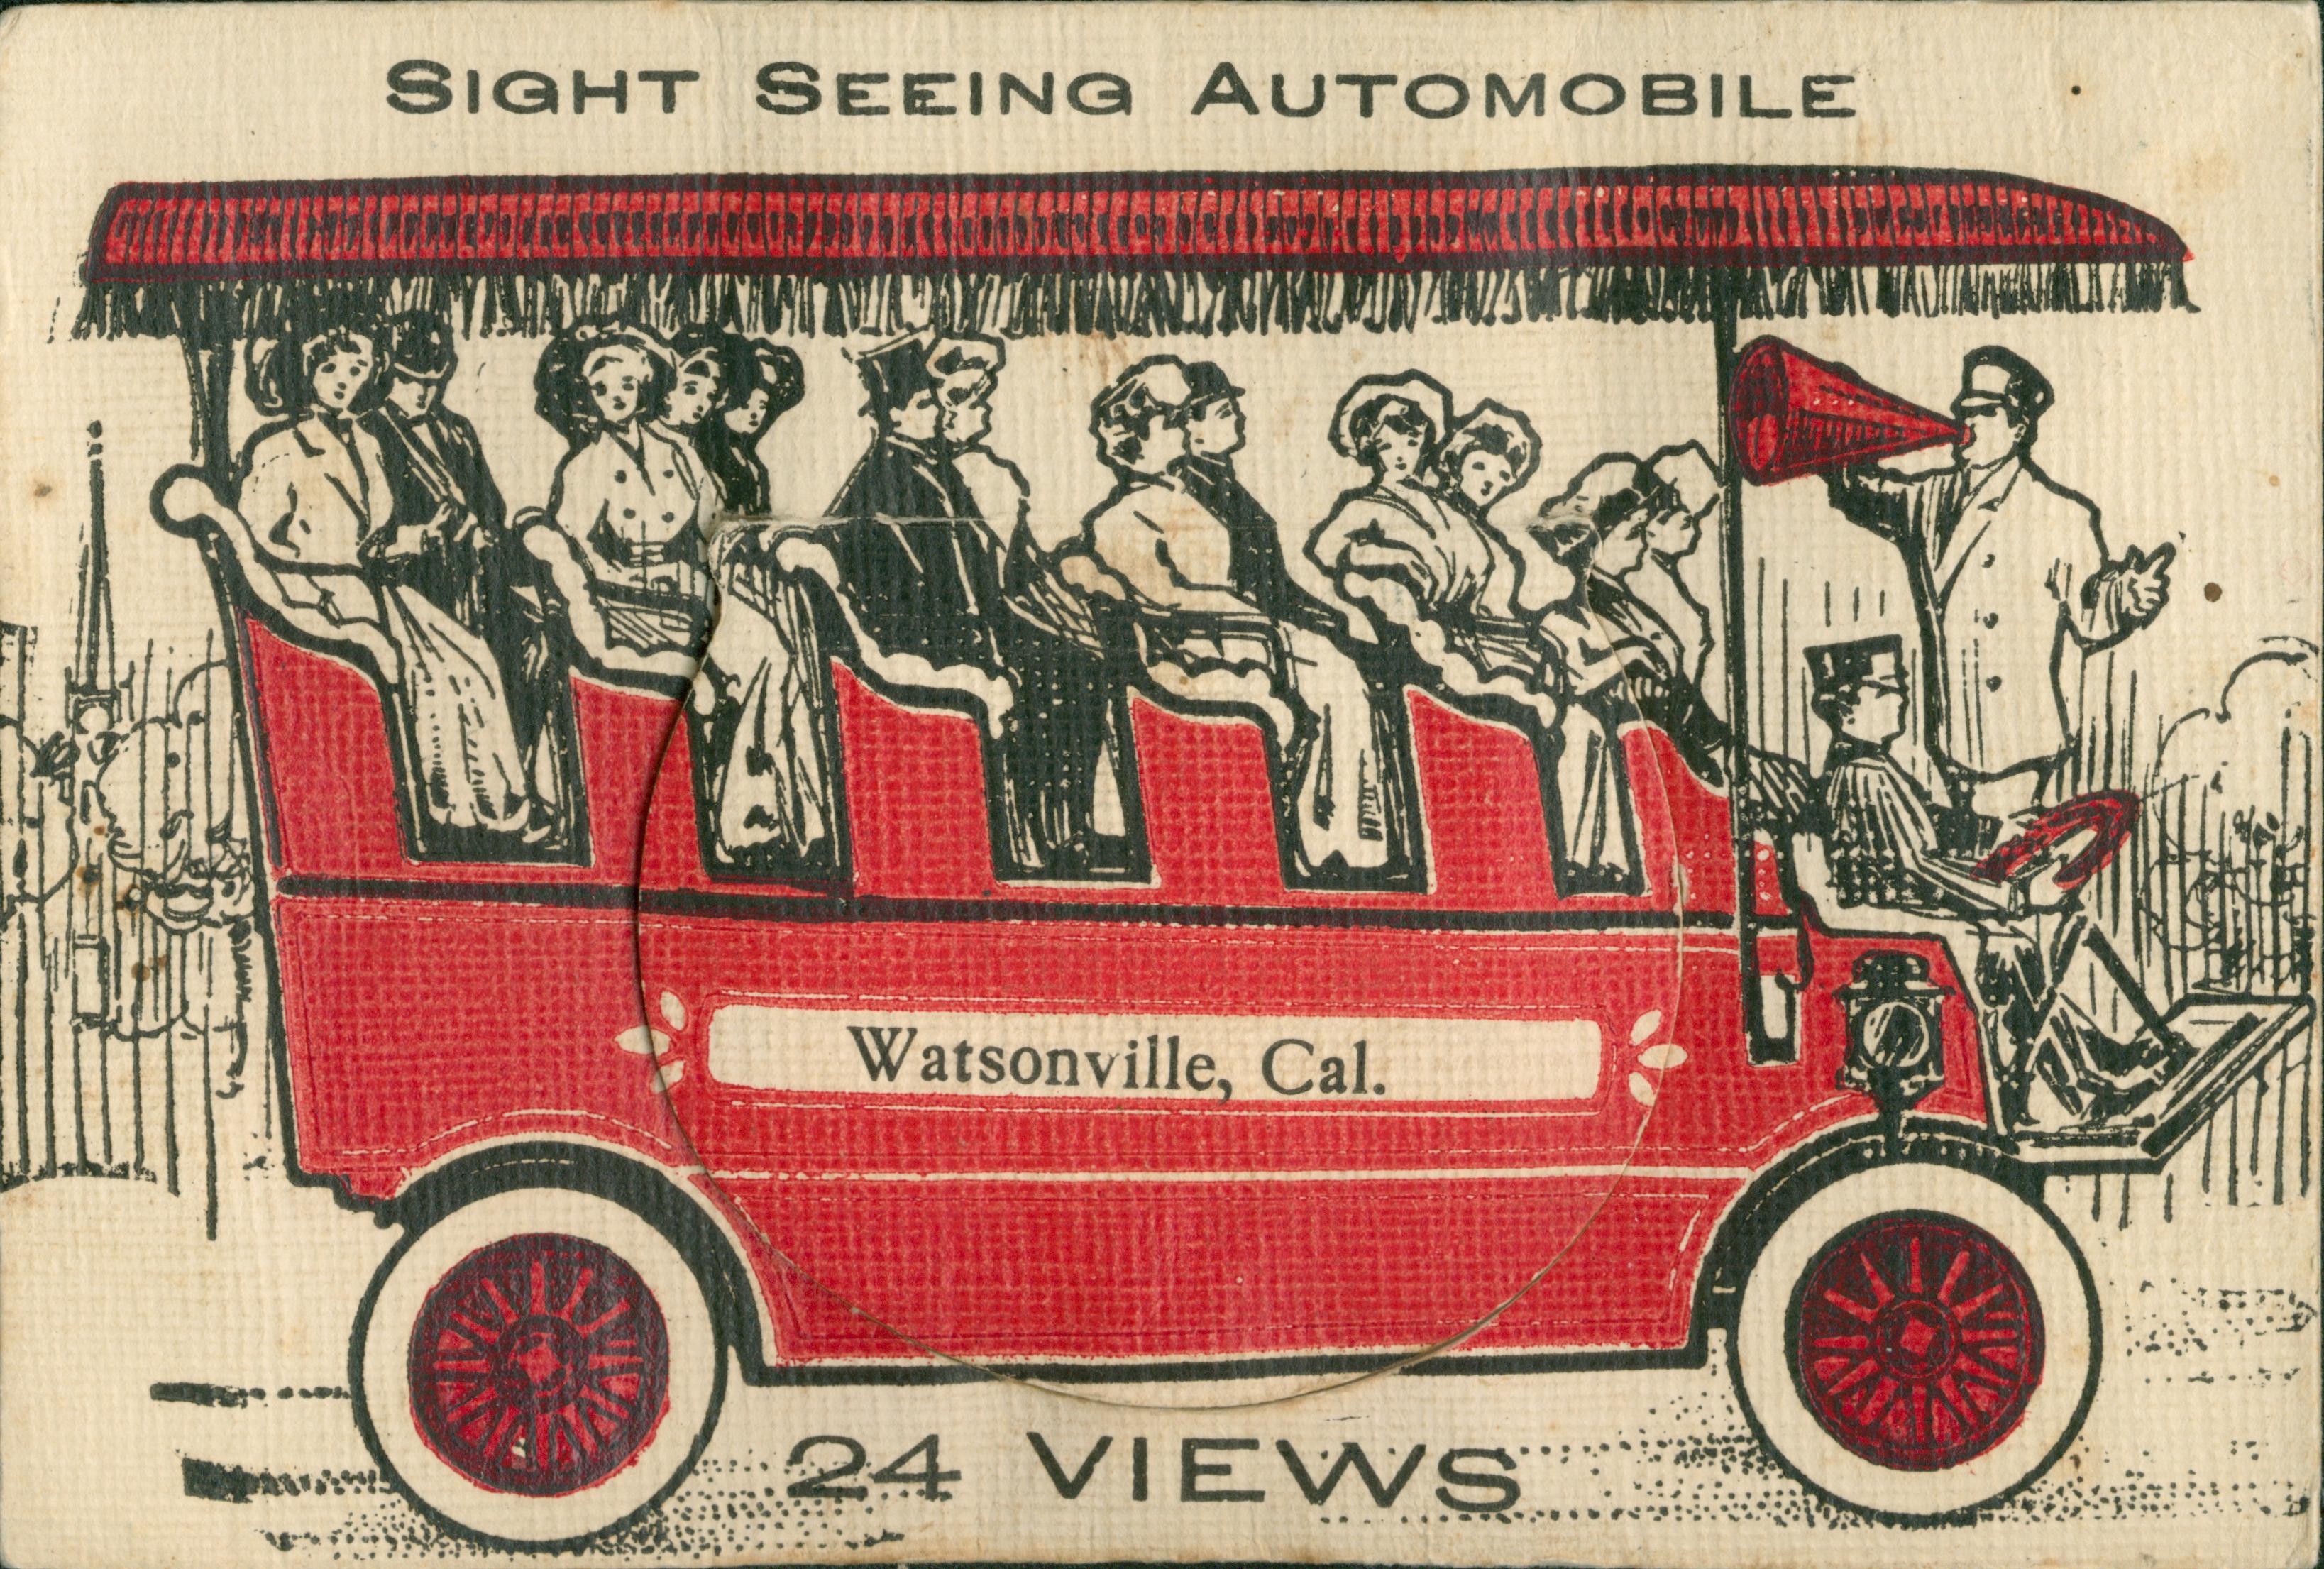 Accordian images of Watsonville, CA,  cascade out of side panel of sight-seeing automobile.